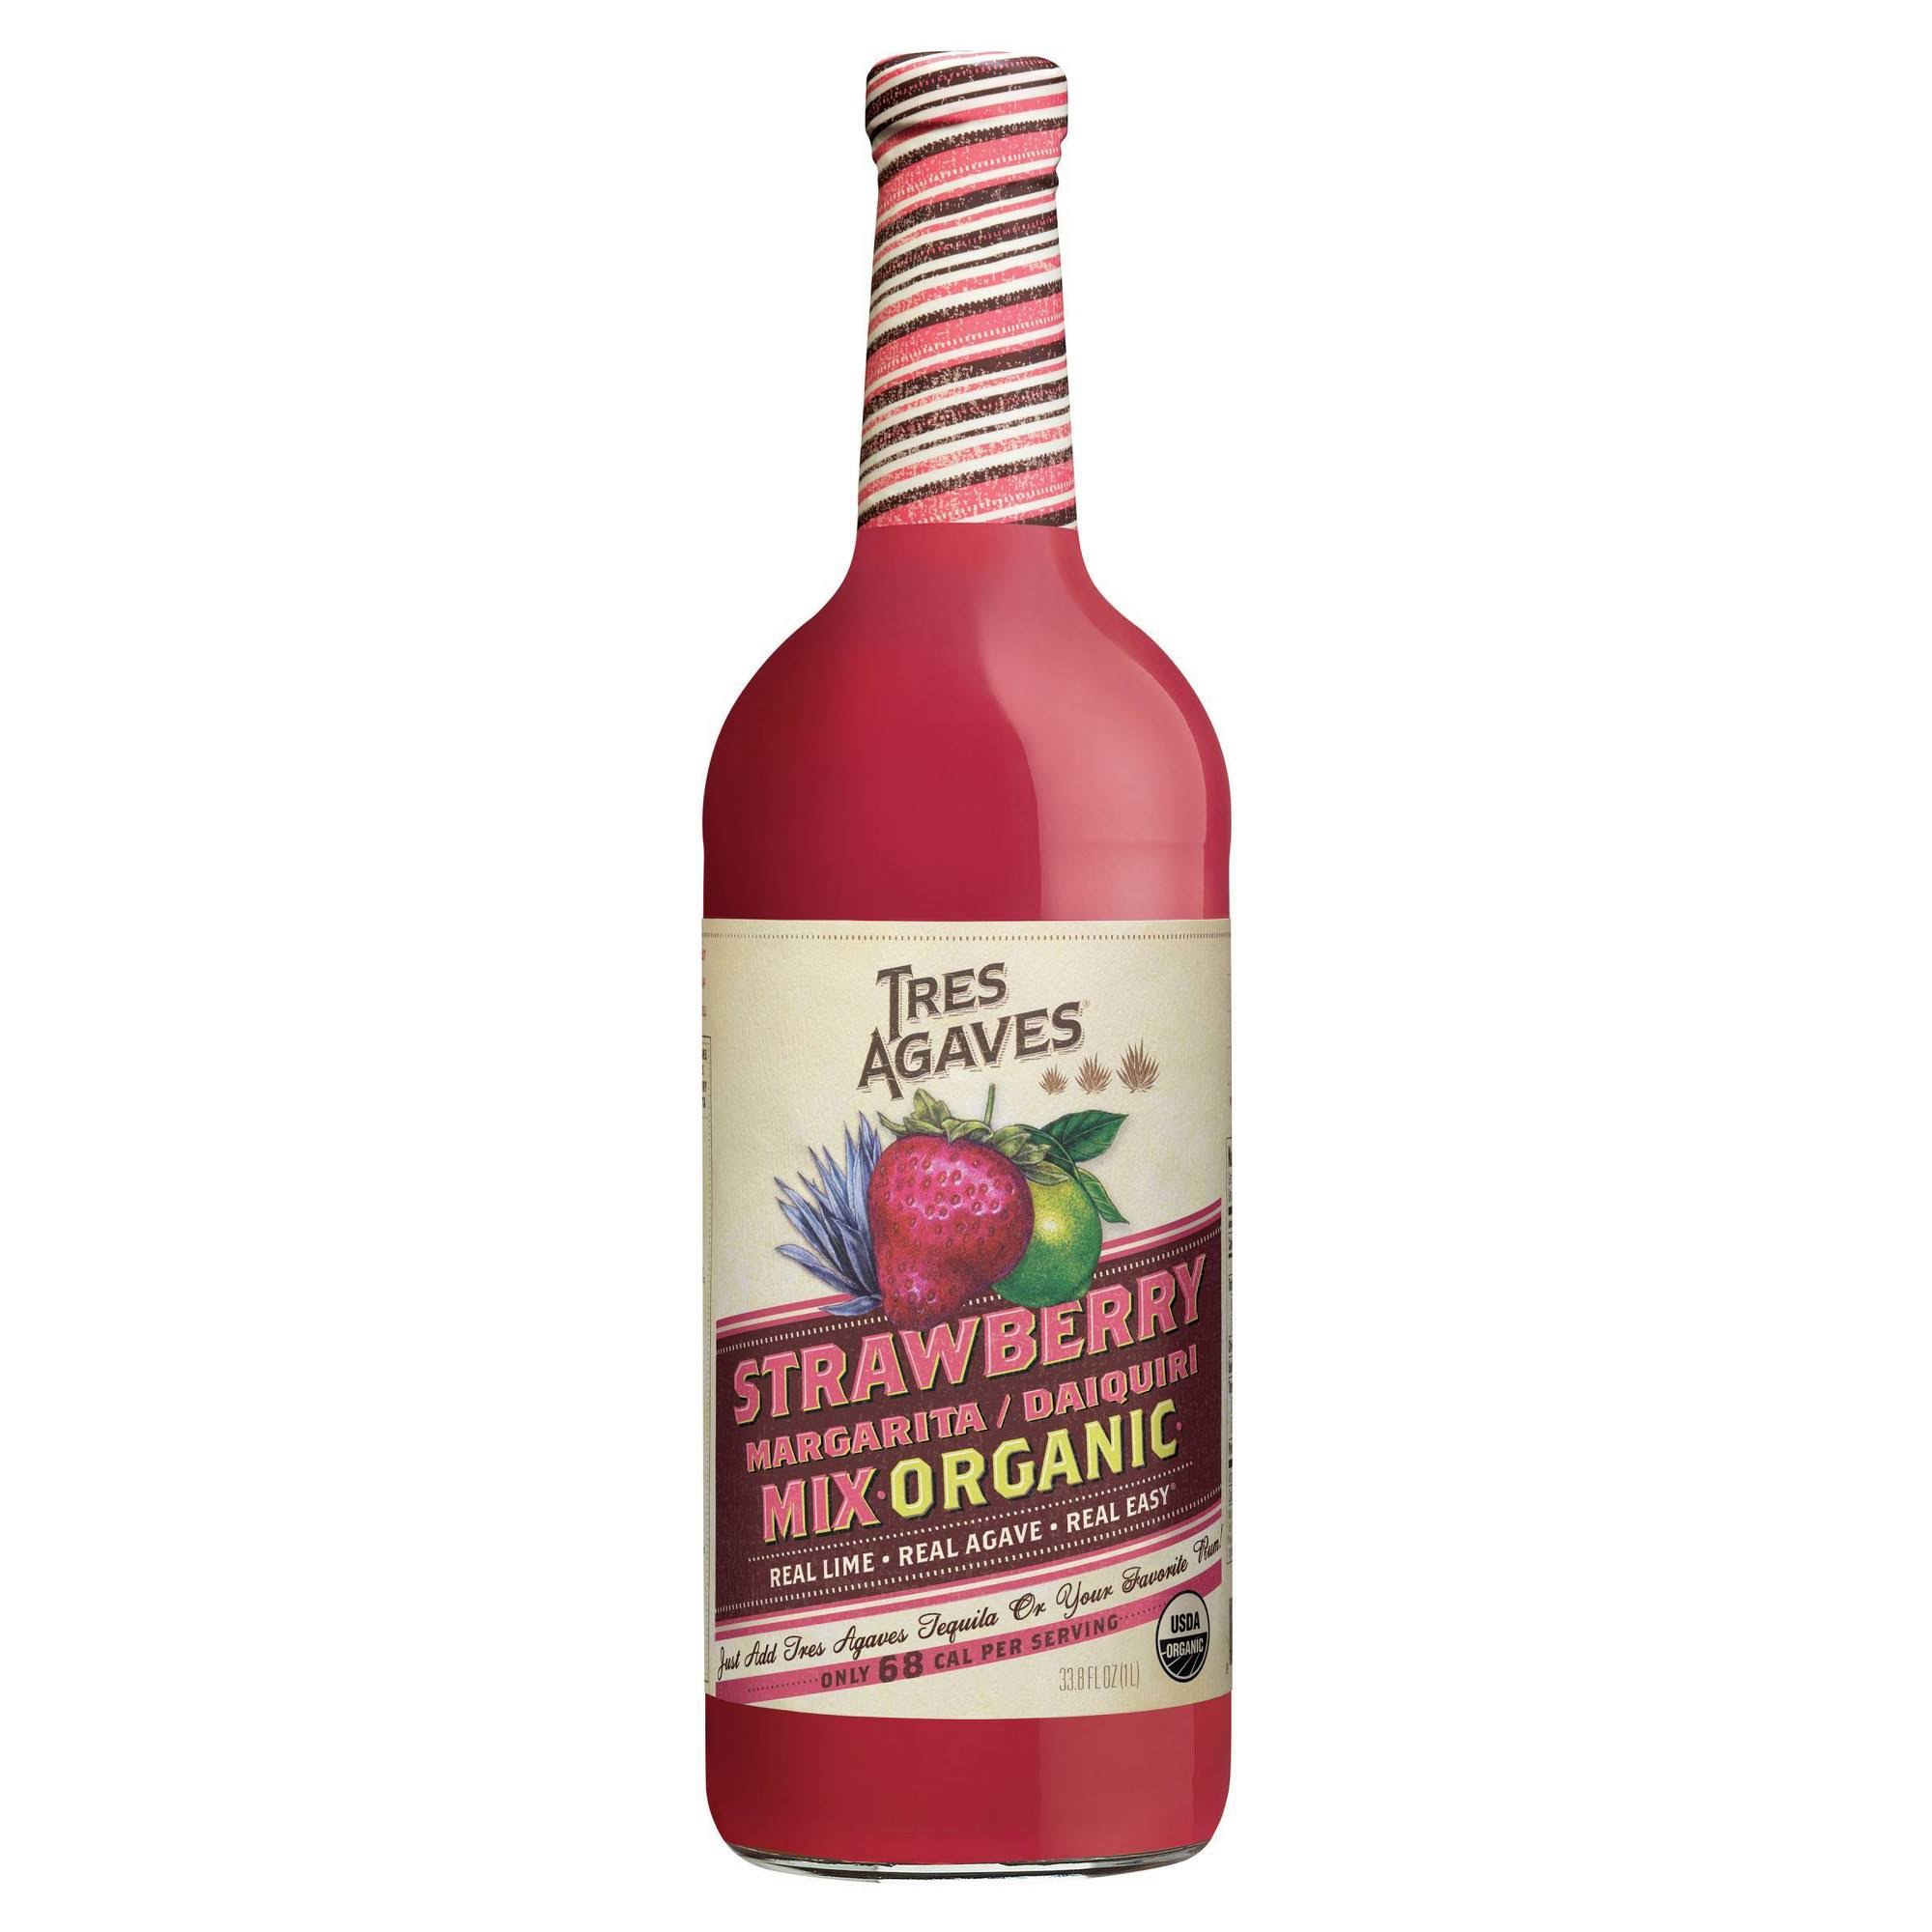 Tres Agaves Strawberry Margarita Mix -2 Pack